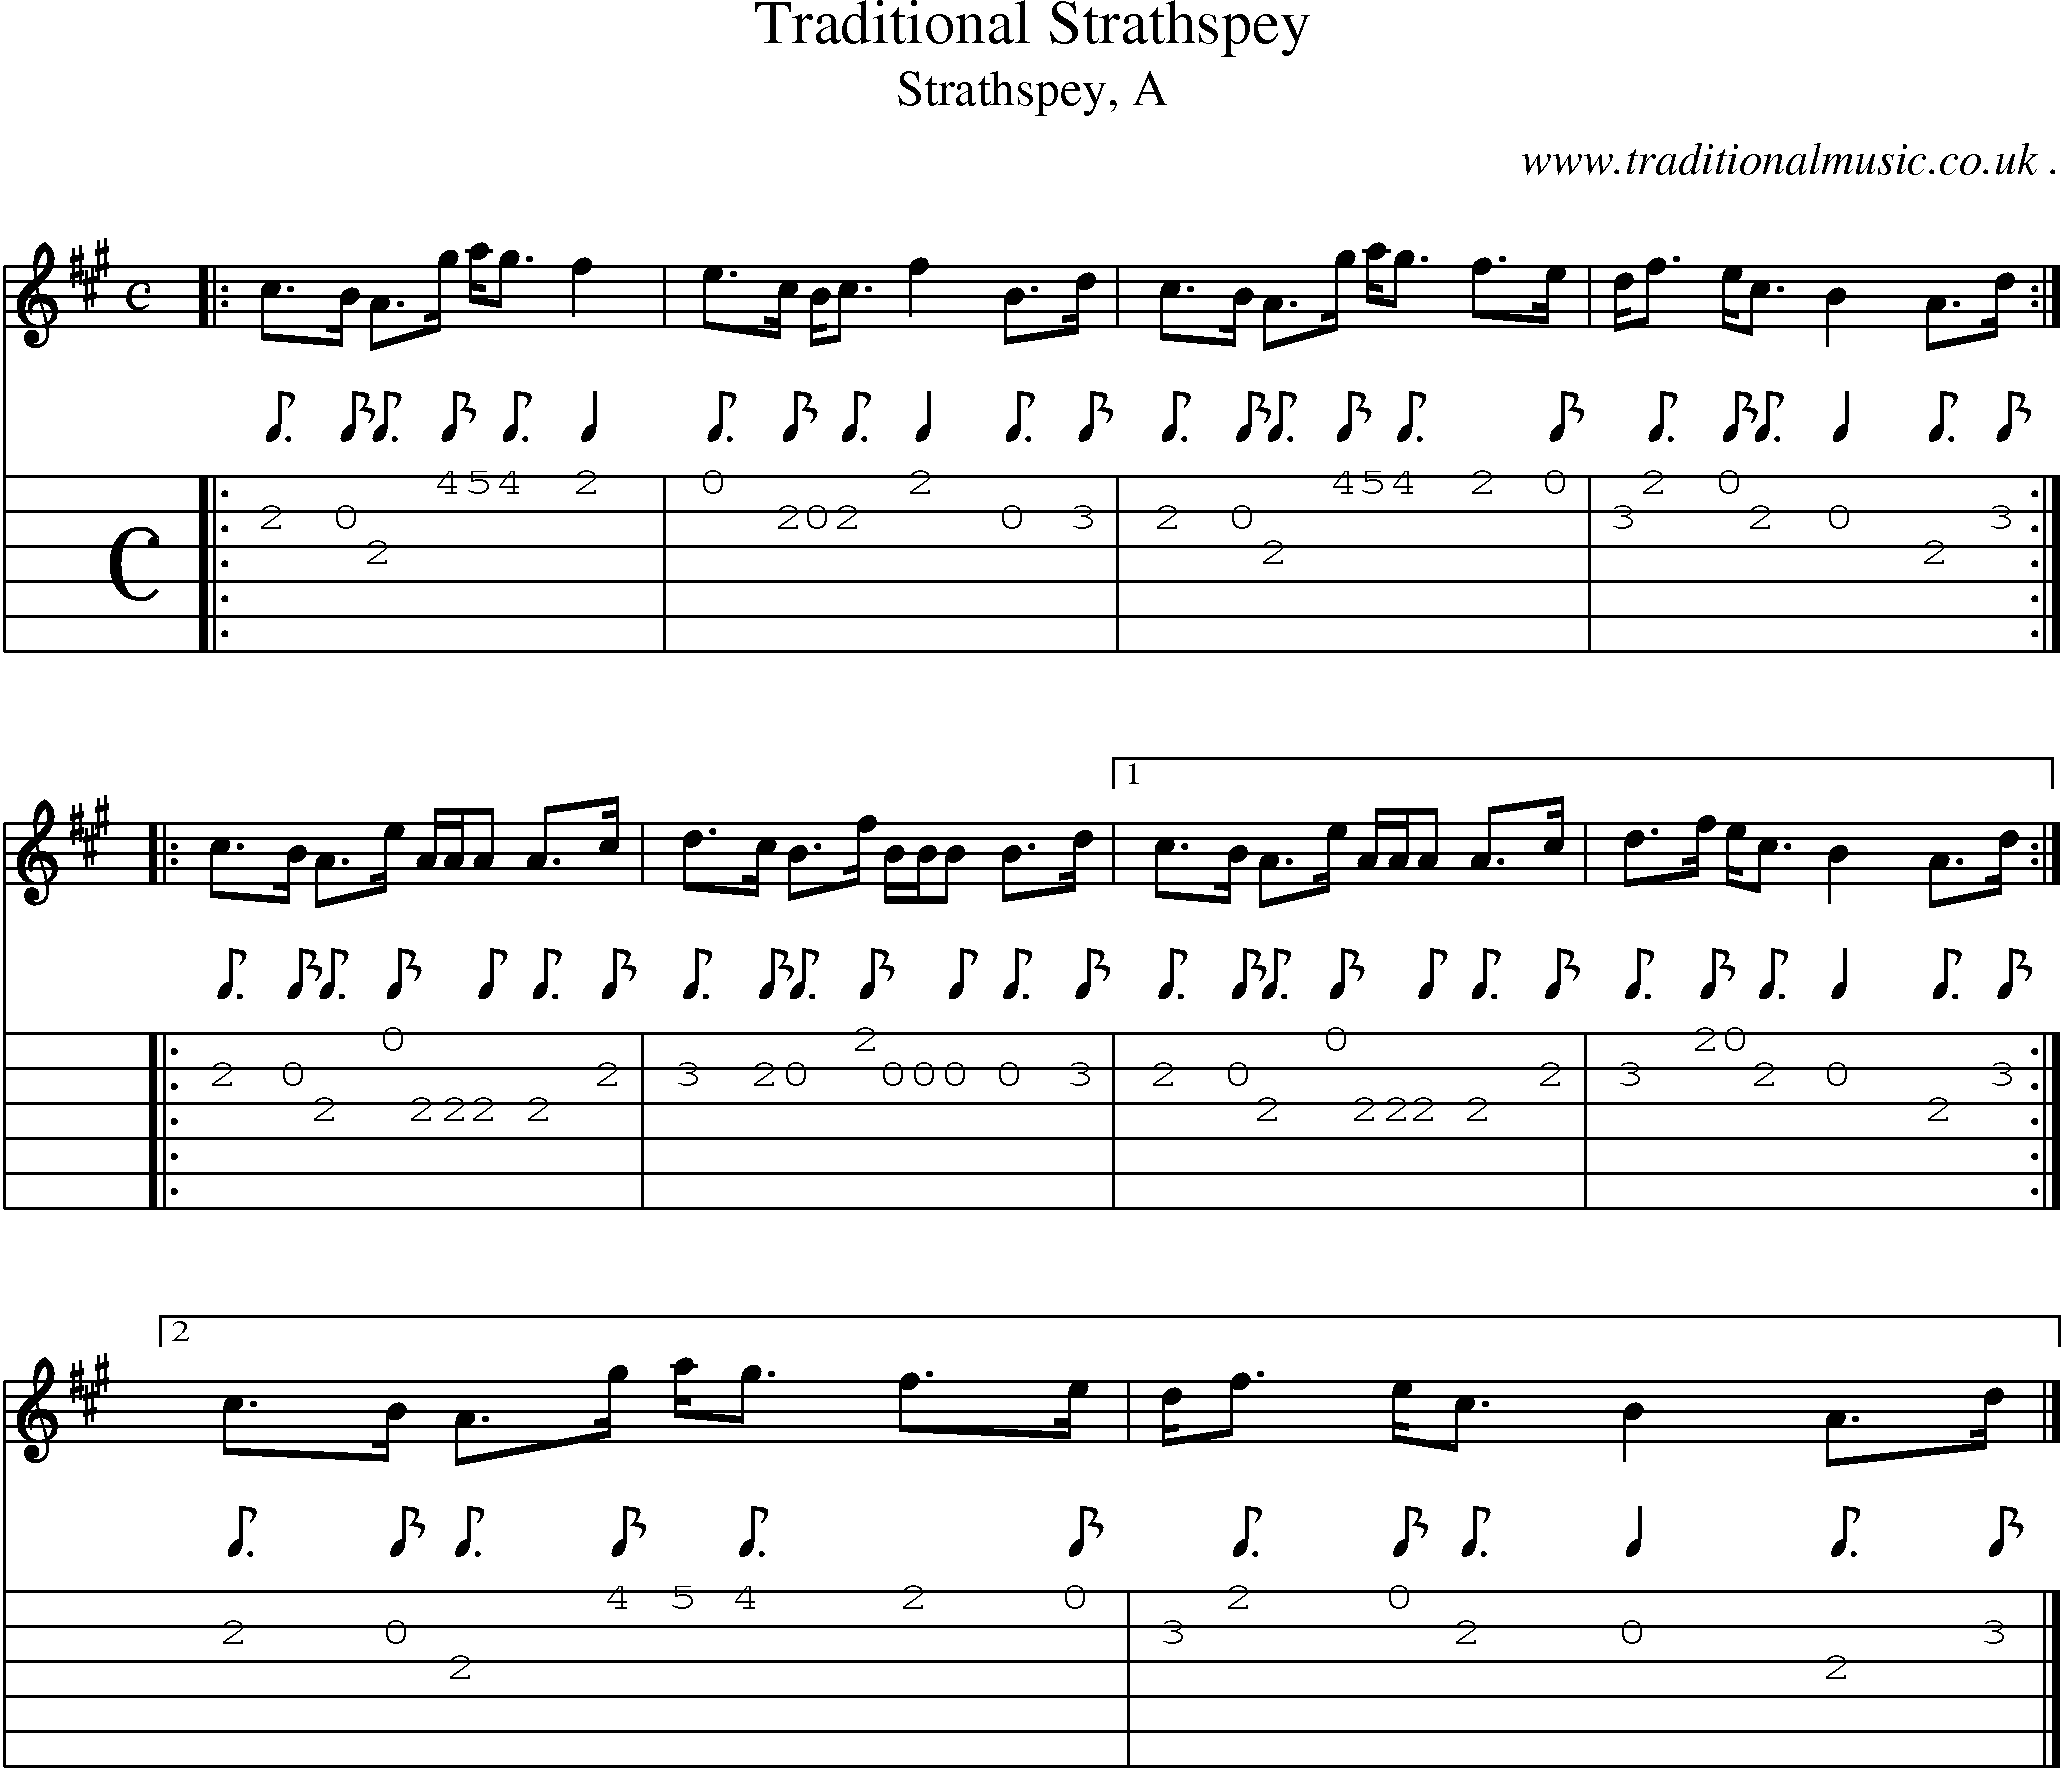 Sheet-music  score, Chords and Guitar Tabs for Traditional Strathspey